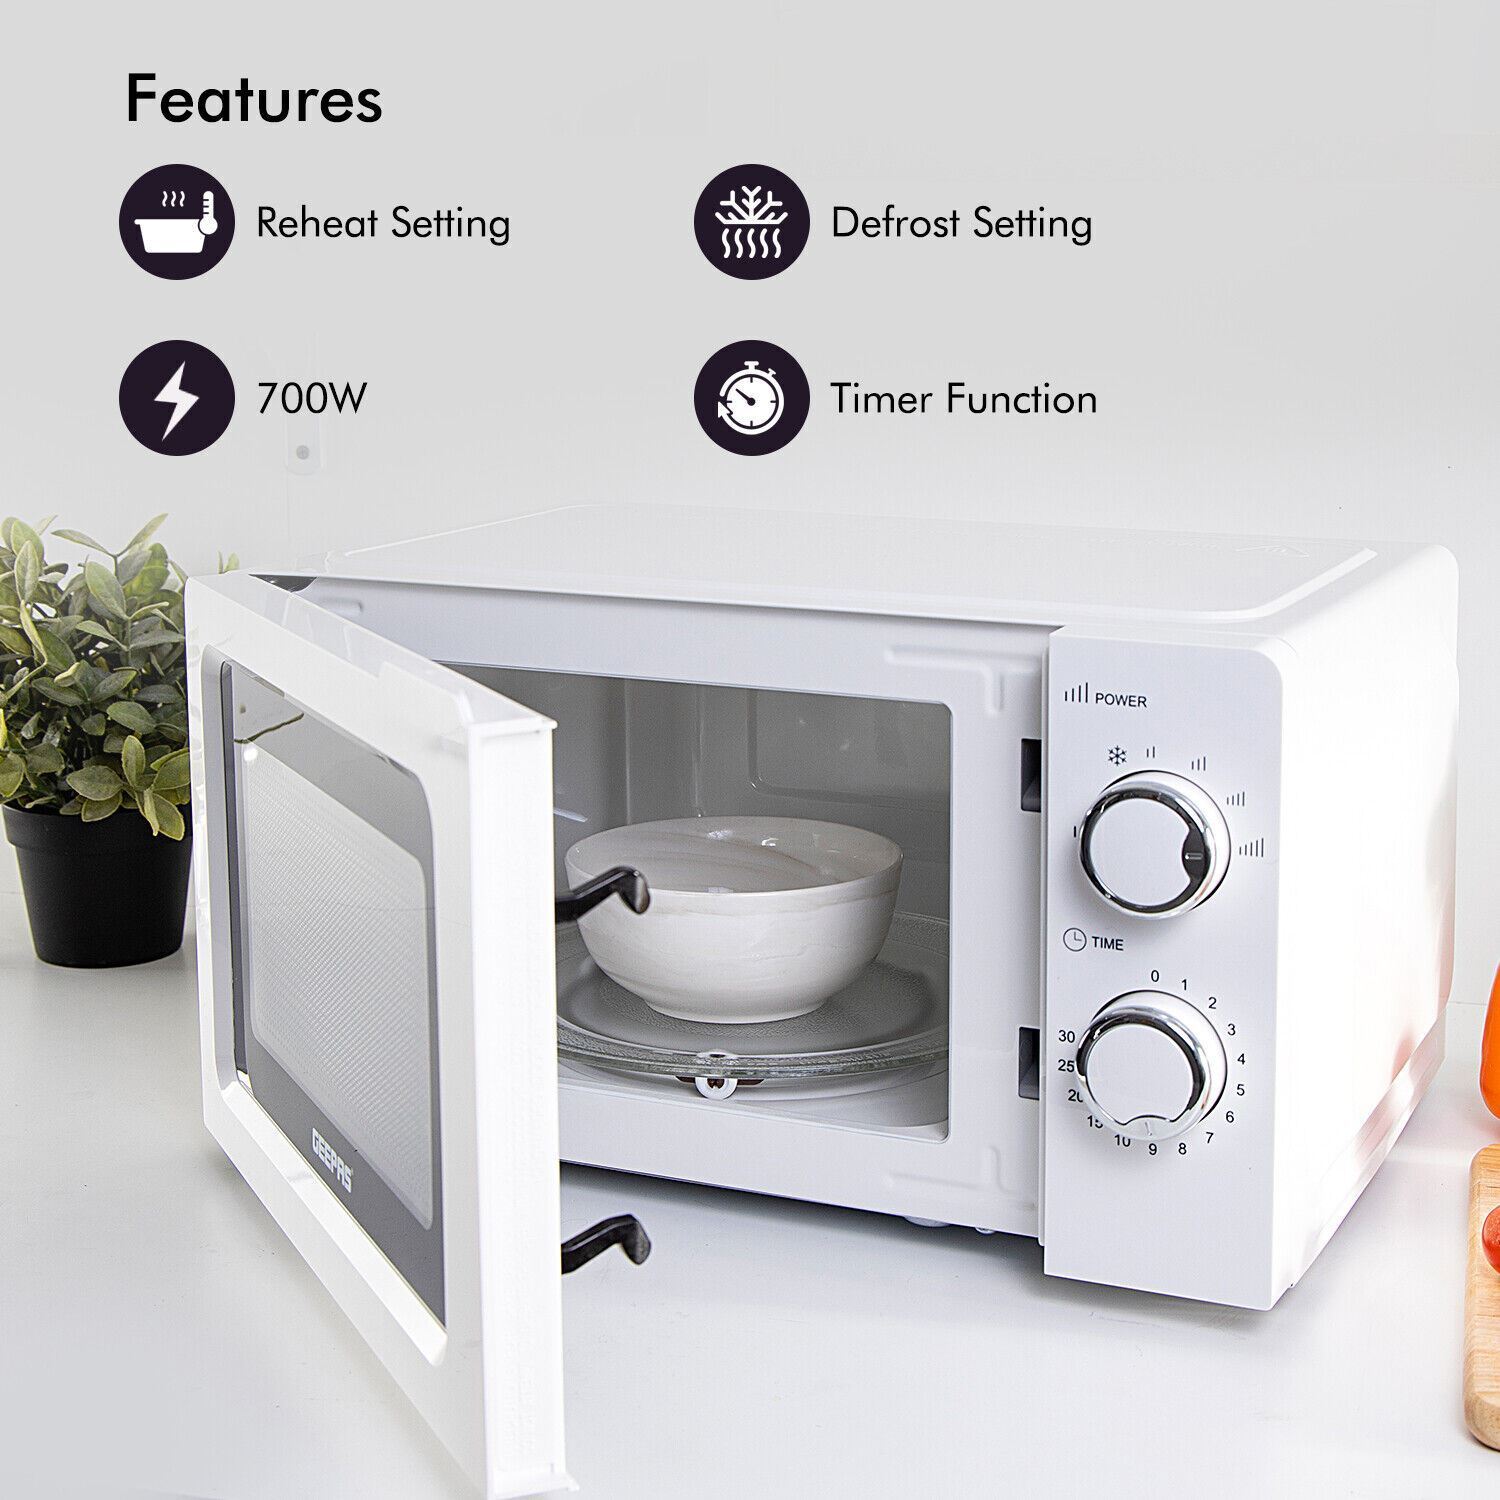 20L Manual Freestanding Microwave With Timer (White & Black)